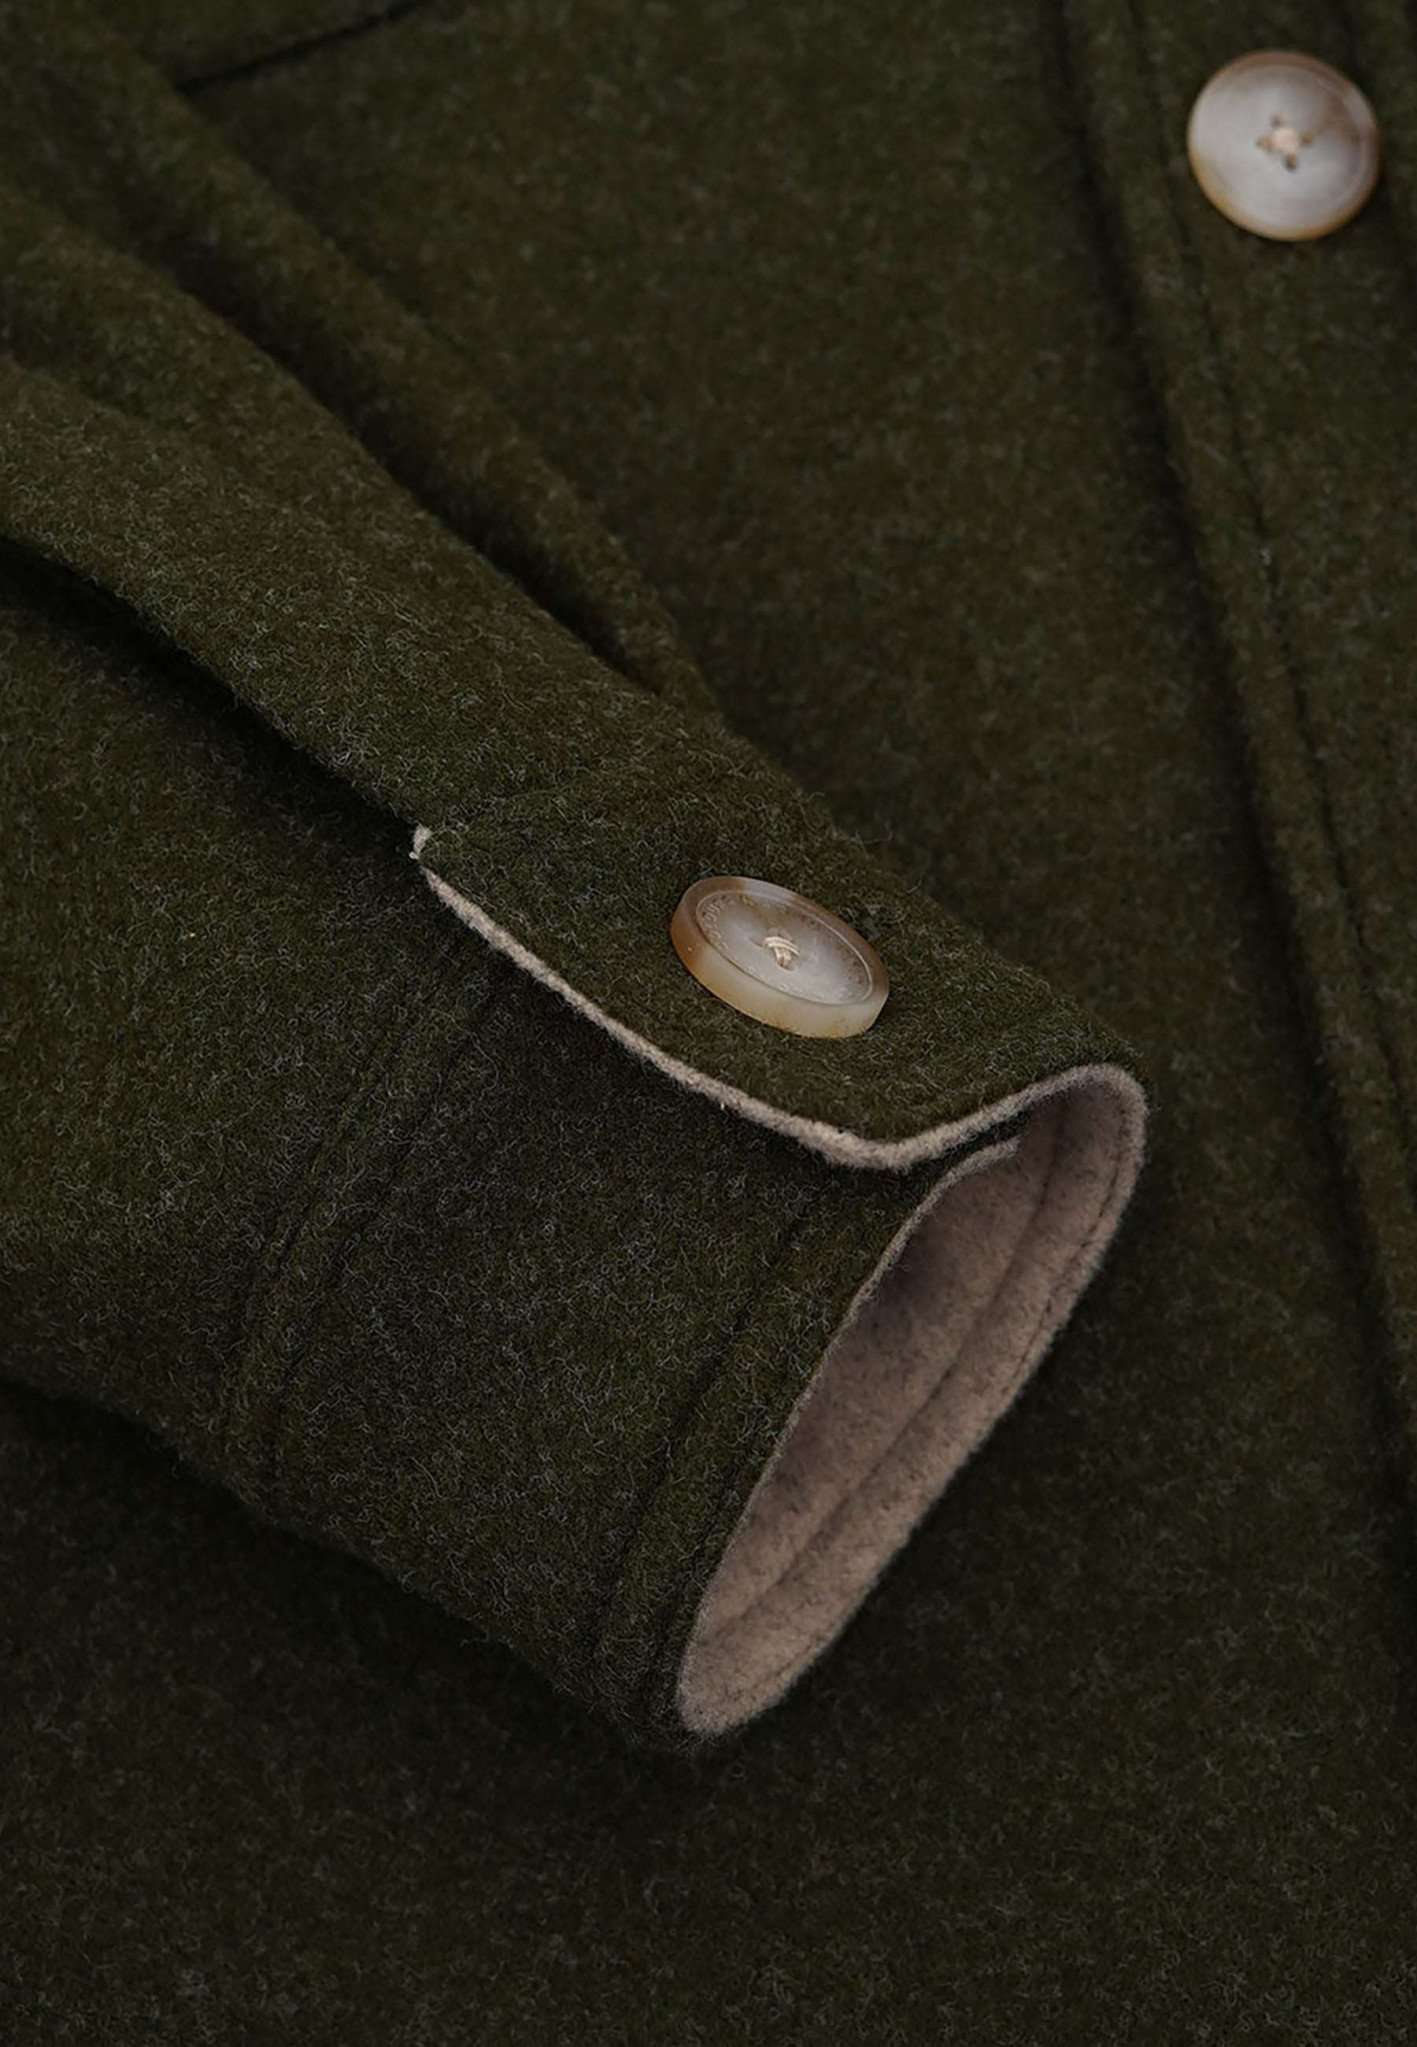 Worker Jacket-Soft Touch in Olive Jacken Colours and Sons   